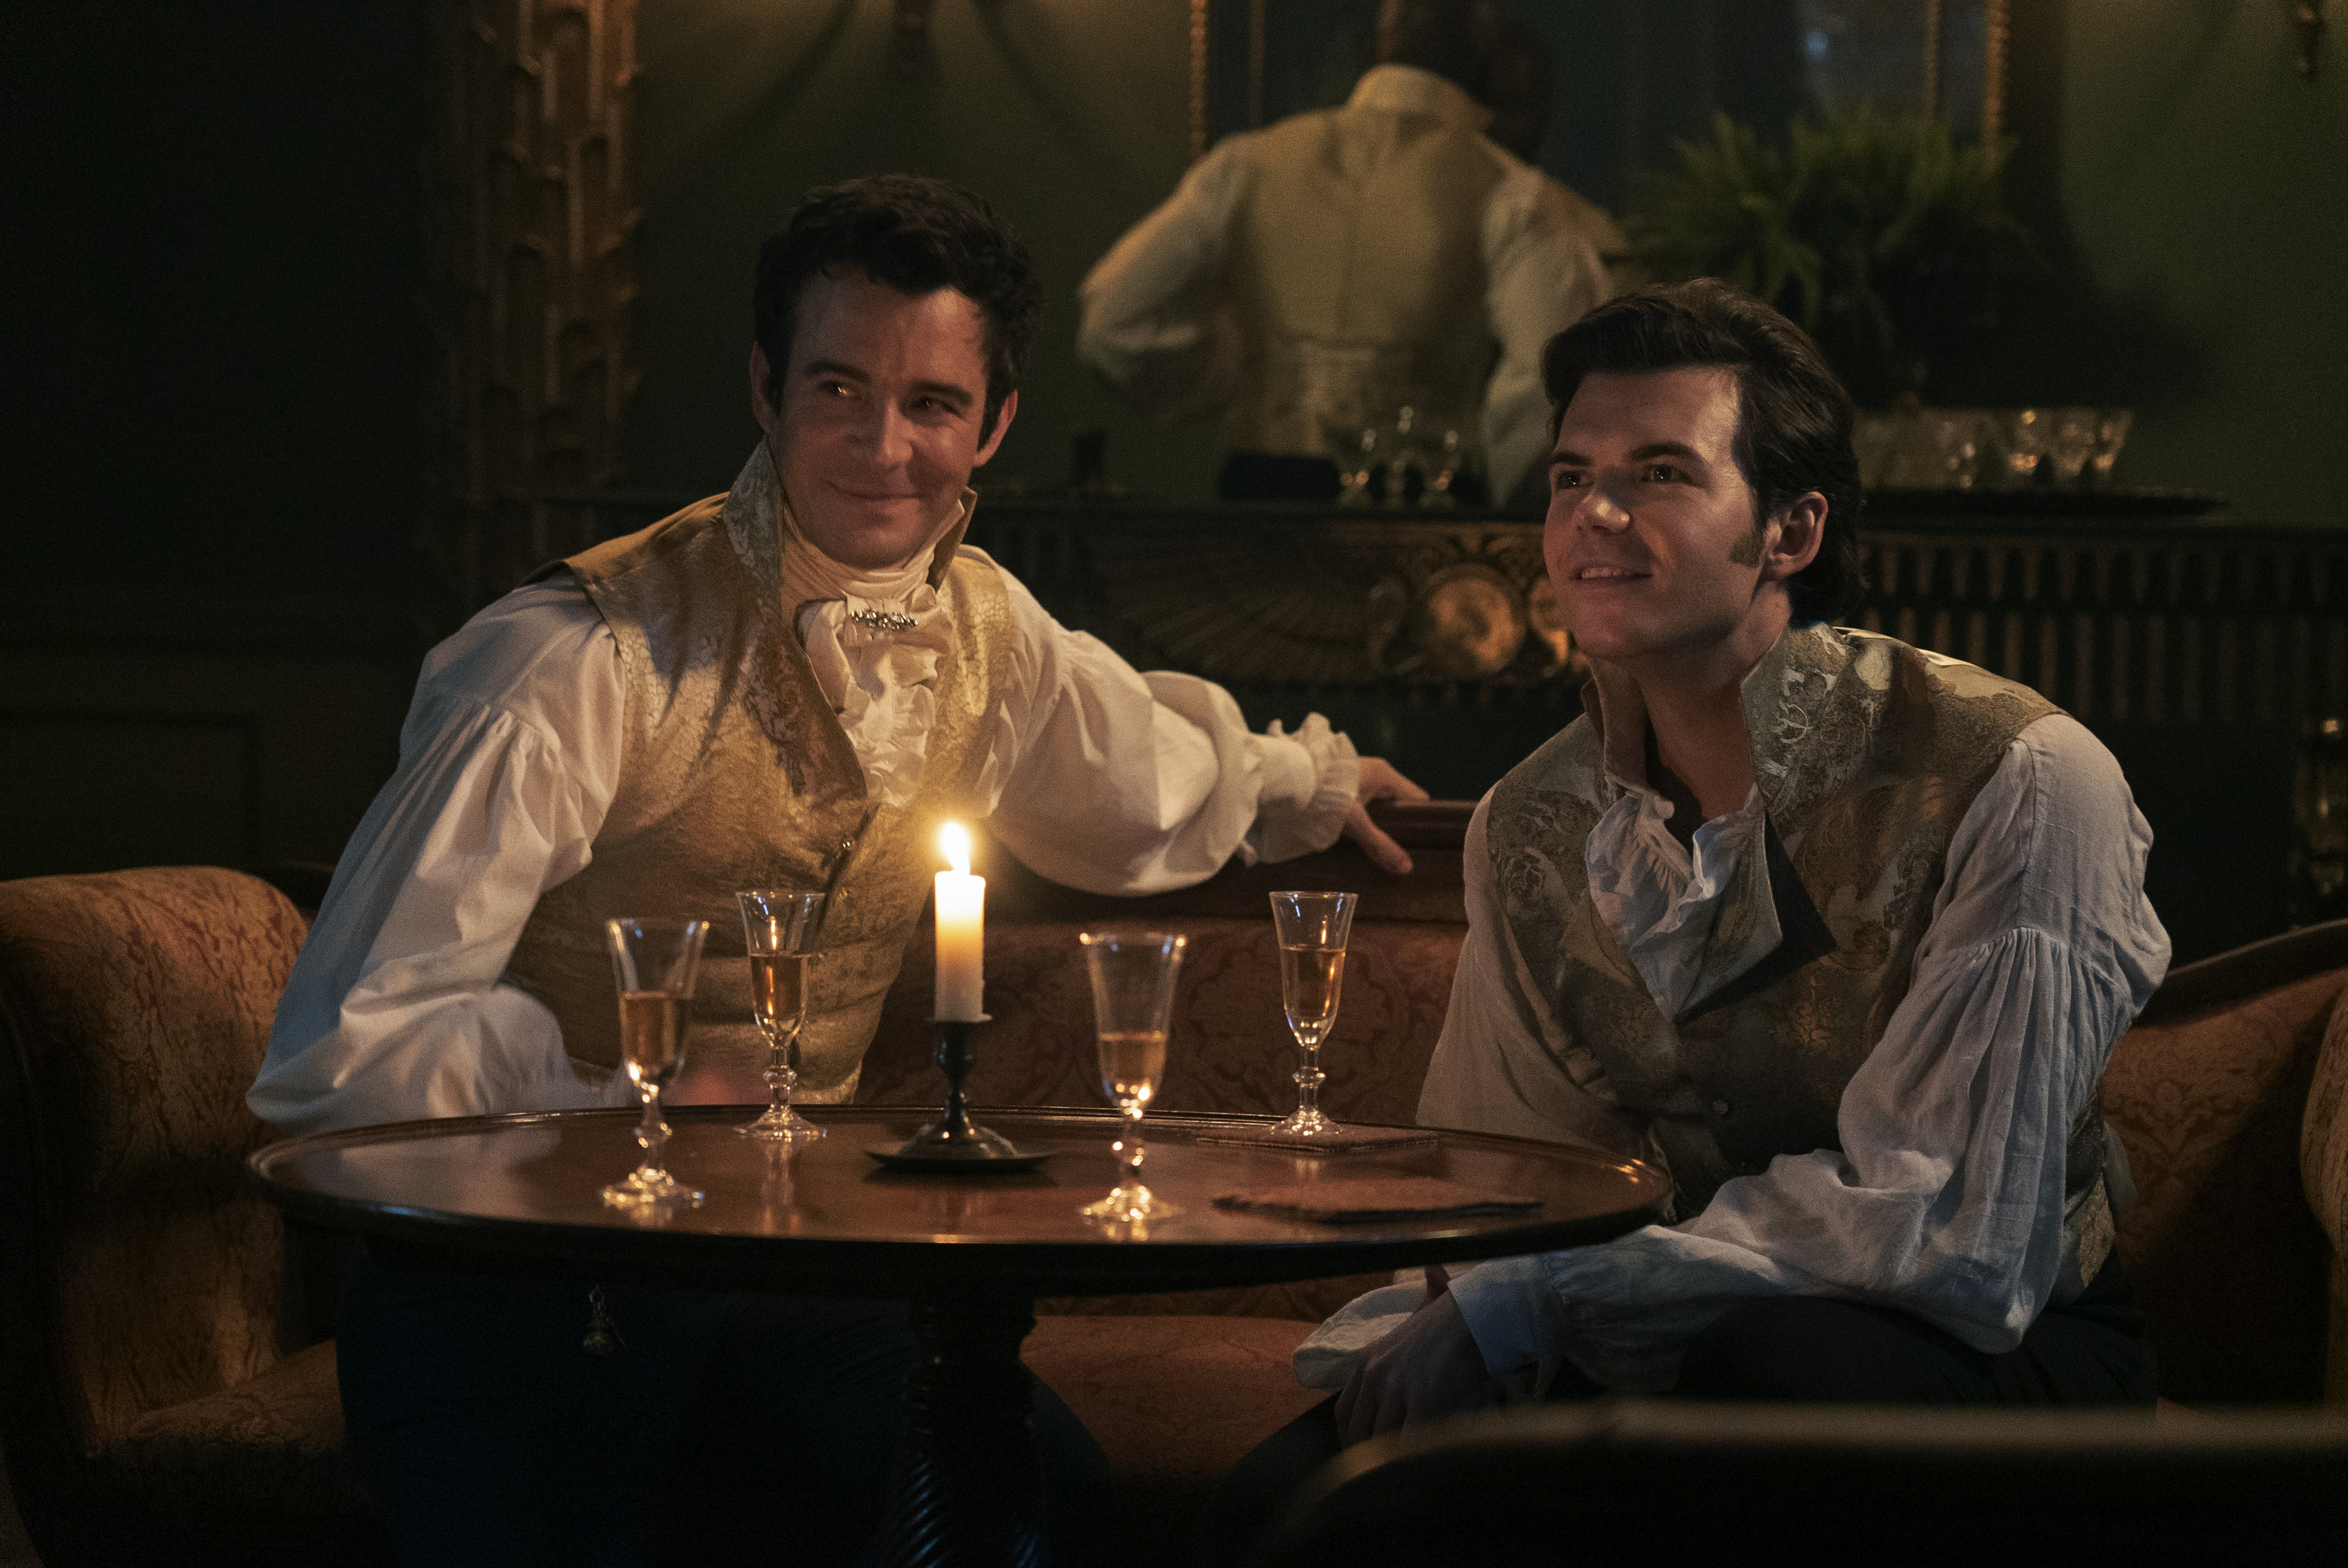 Two actors in historical costumes sitting at a table with champagne flutes and a candle, a scene from a period drama